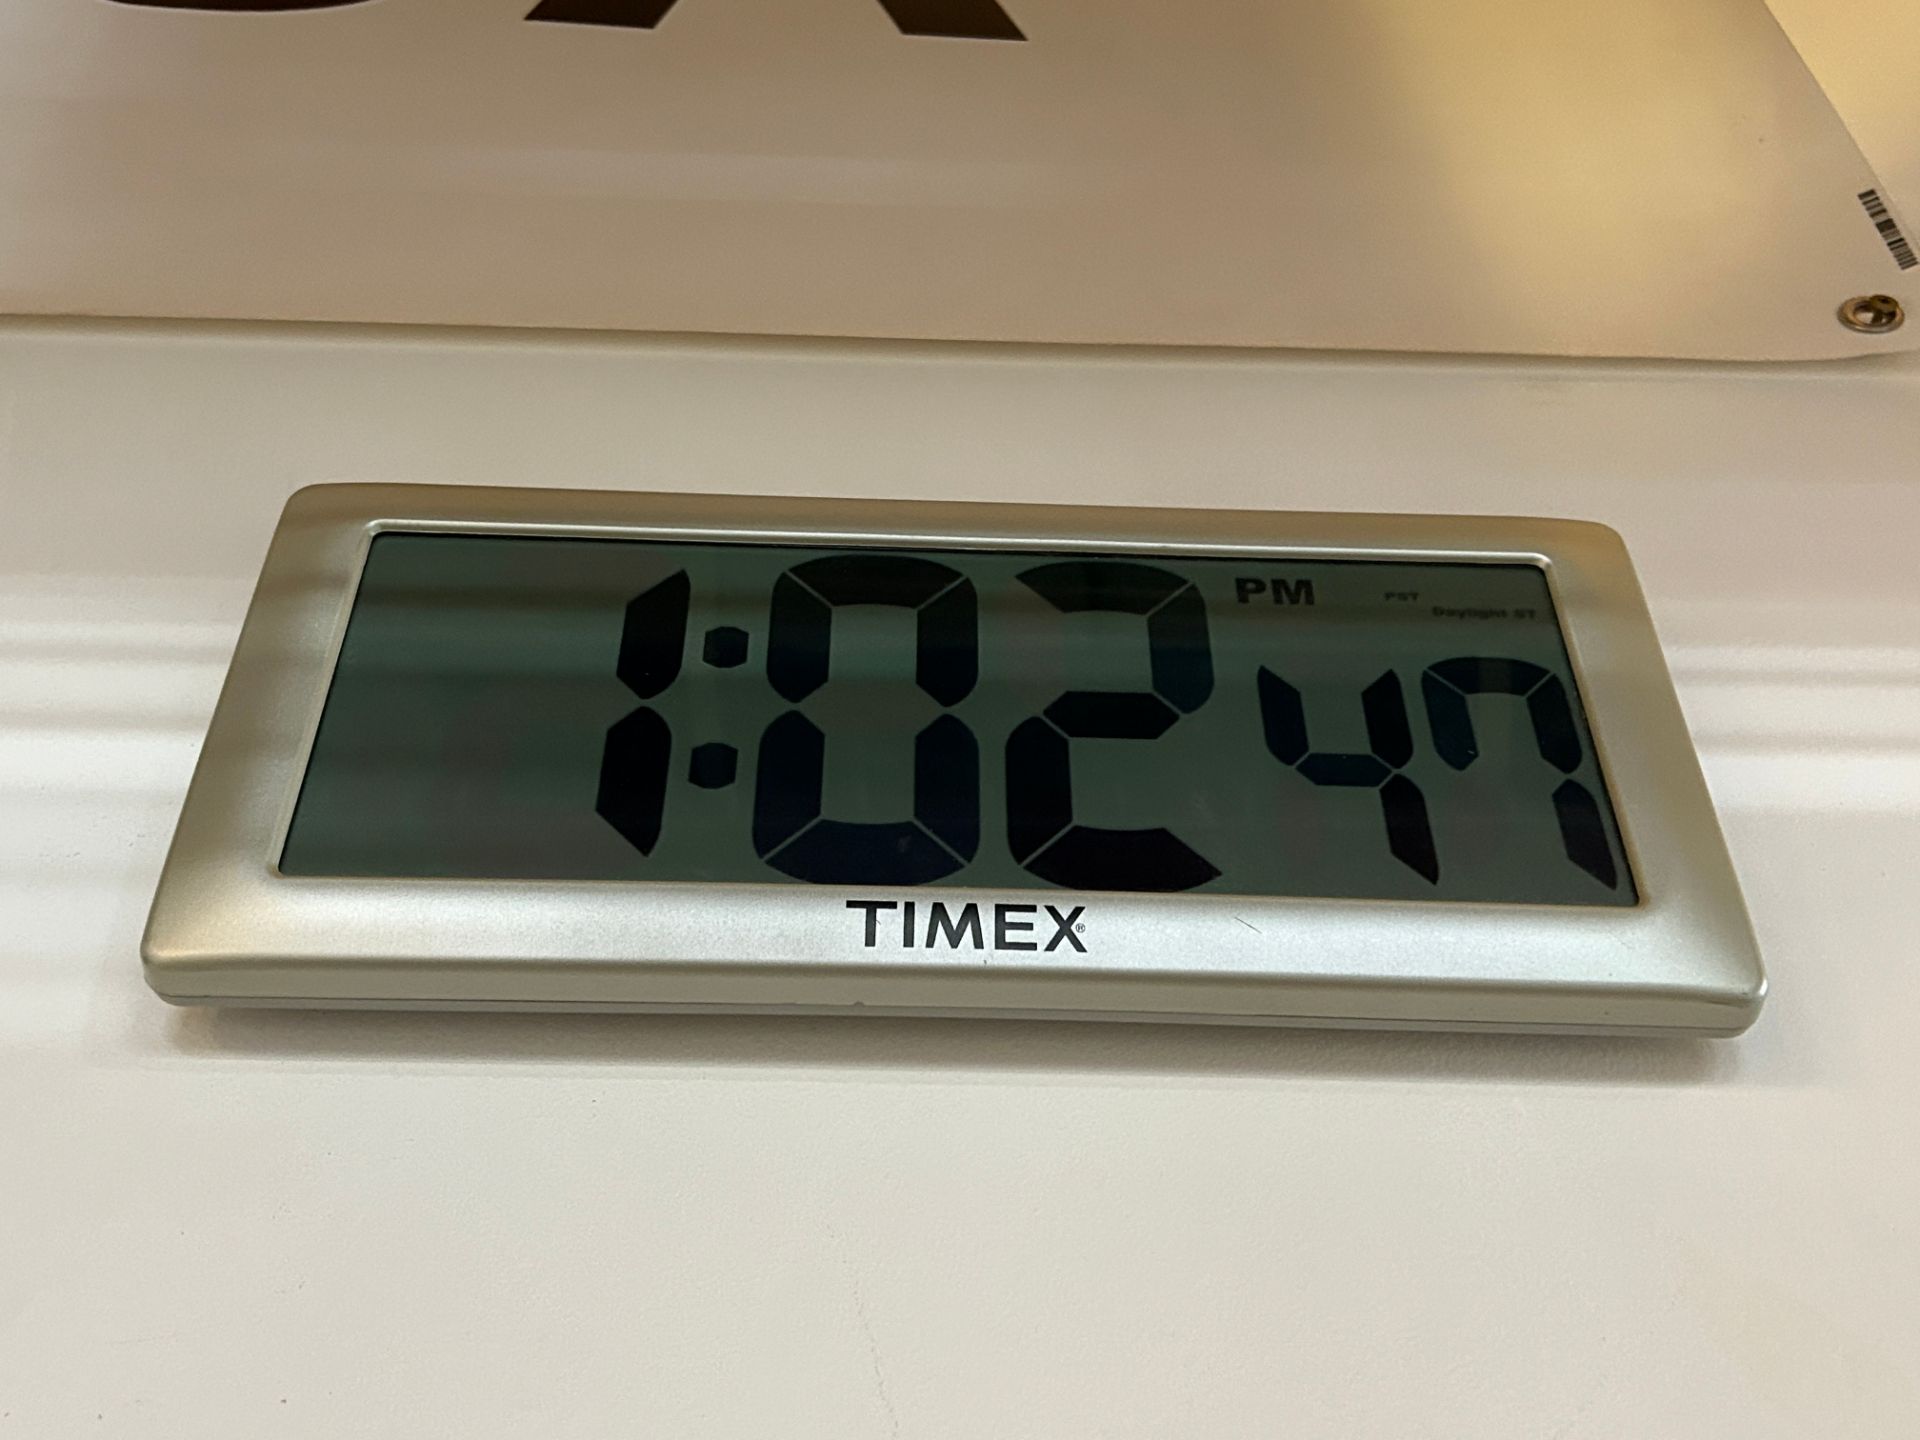 Timex / XREXS, Lot - (2) Wall Mount Digital Clocks, with Time, Day, Date Displayed - Image 2 of 2